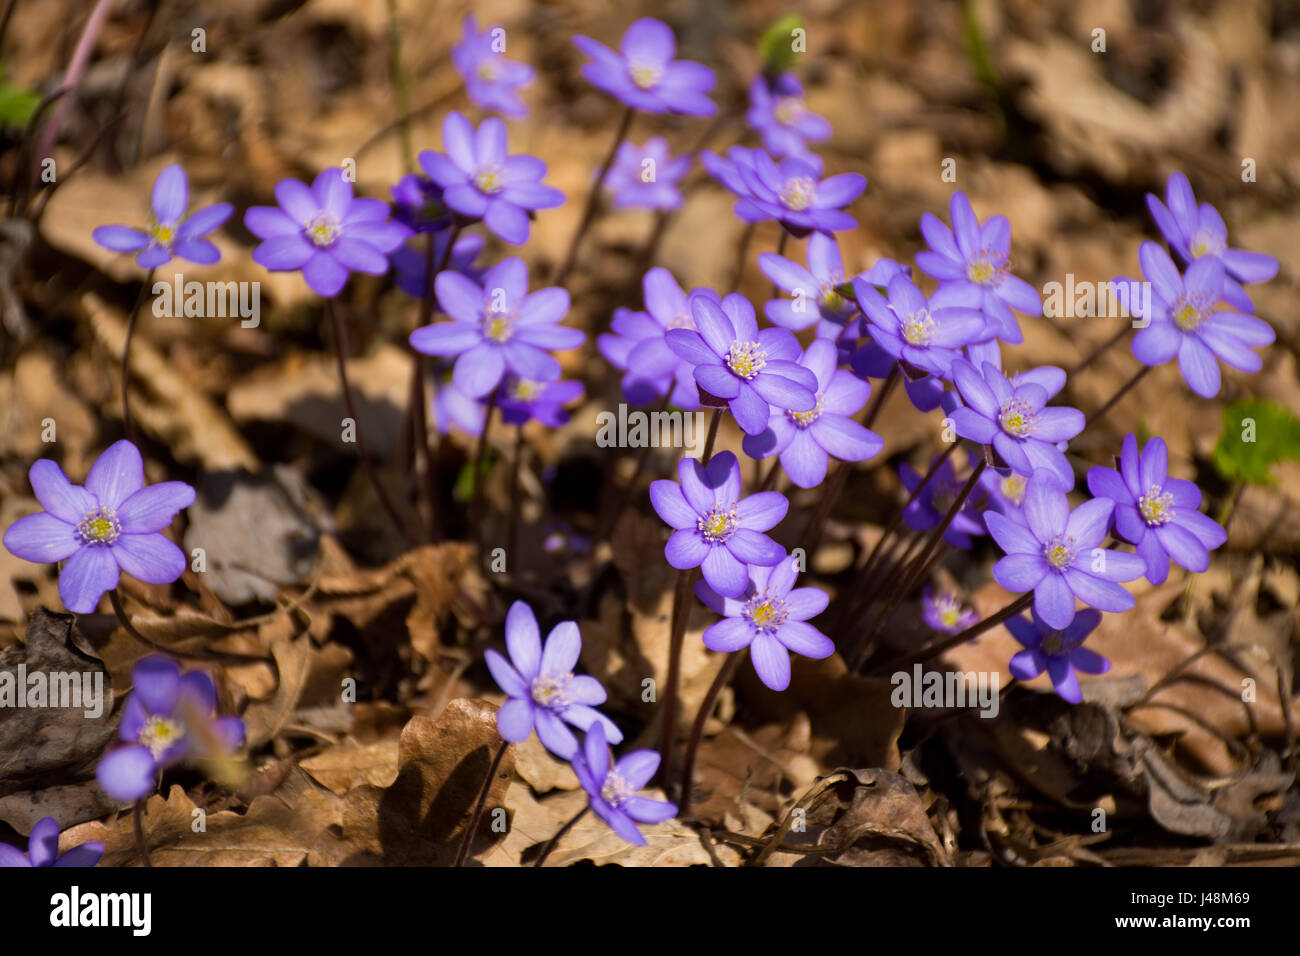 Liverwort blossoms (Hepatica nobilis) in deciduous forest under sunny skies. Beautiful early-spring flowering plants rise through autumn foliage. Stock Photo